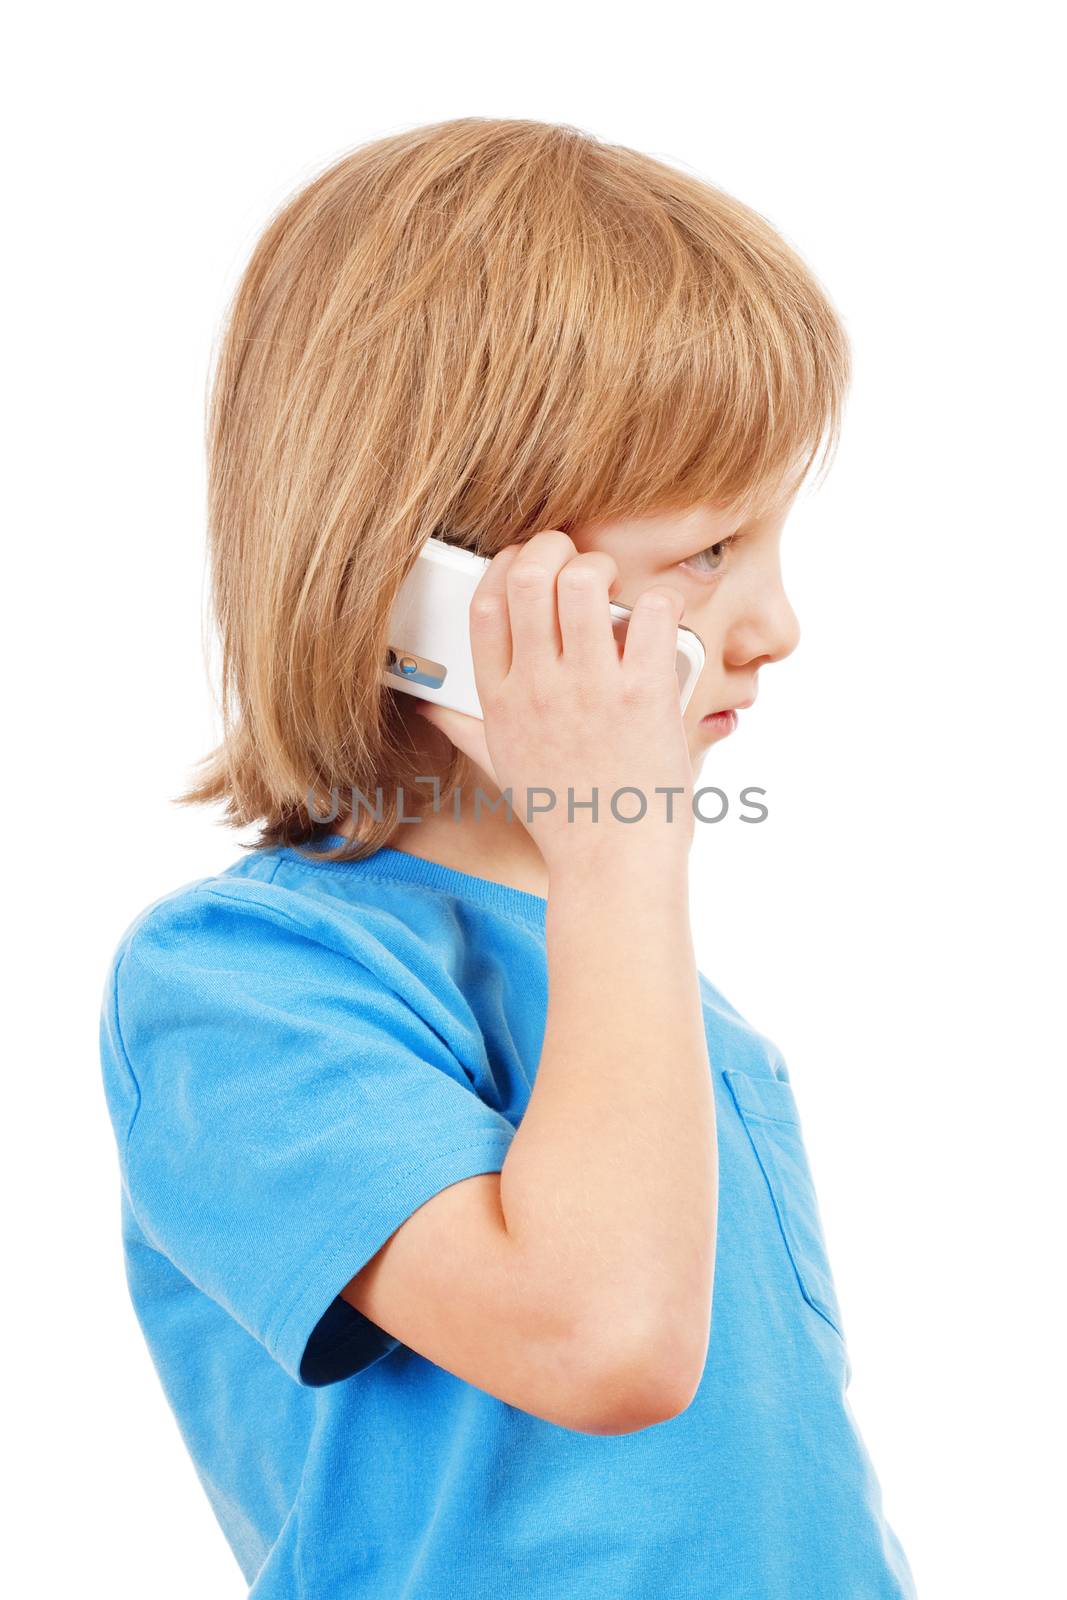 Portrait of a Boy Talking on Mobile Phone - Isolated on White